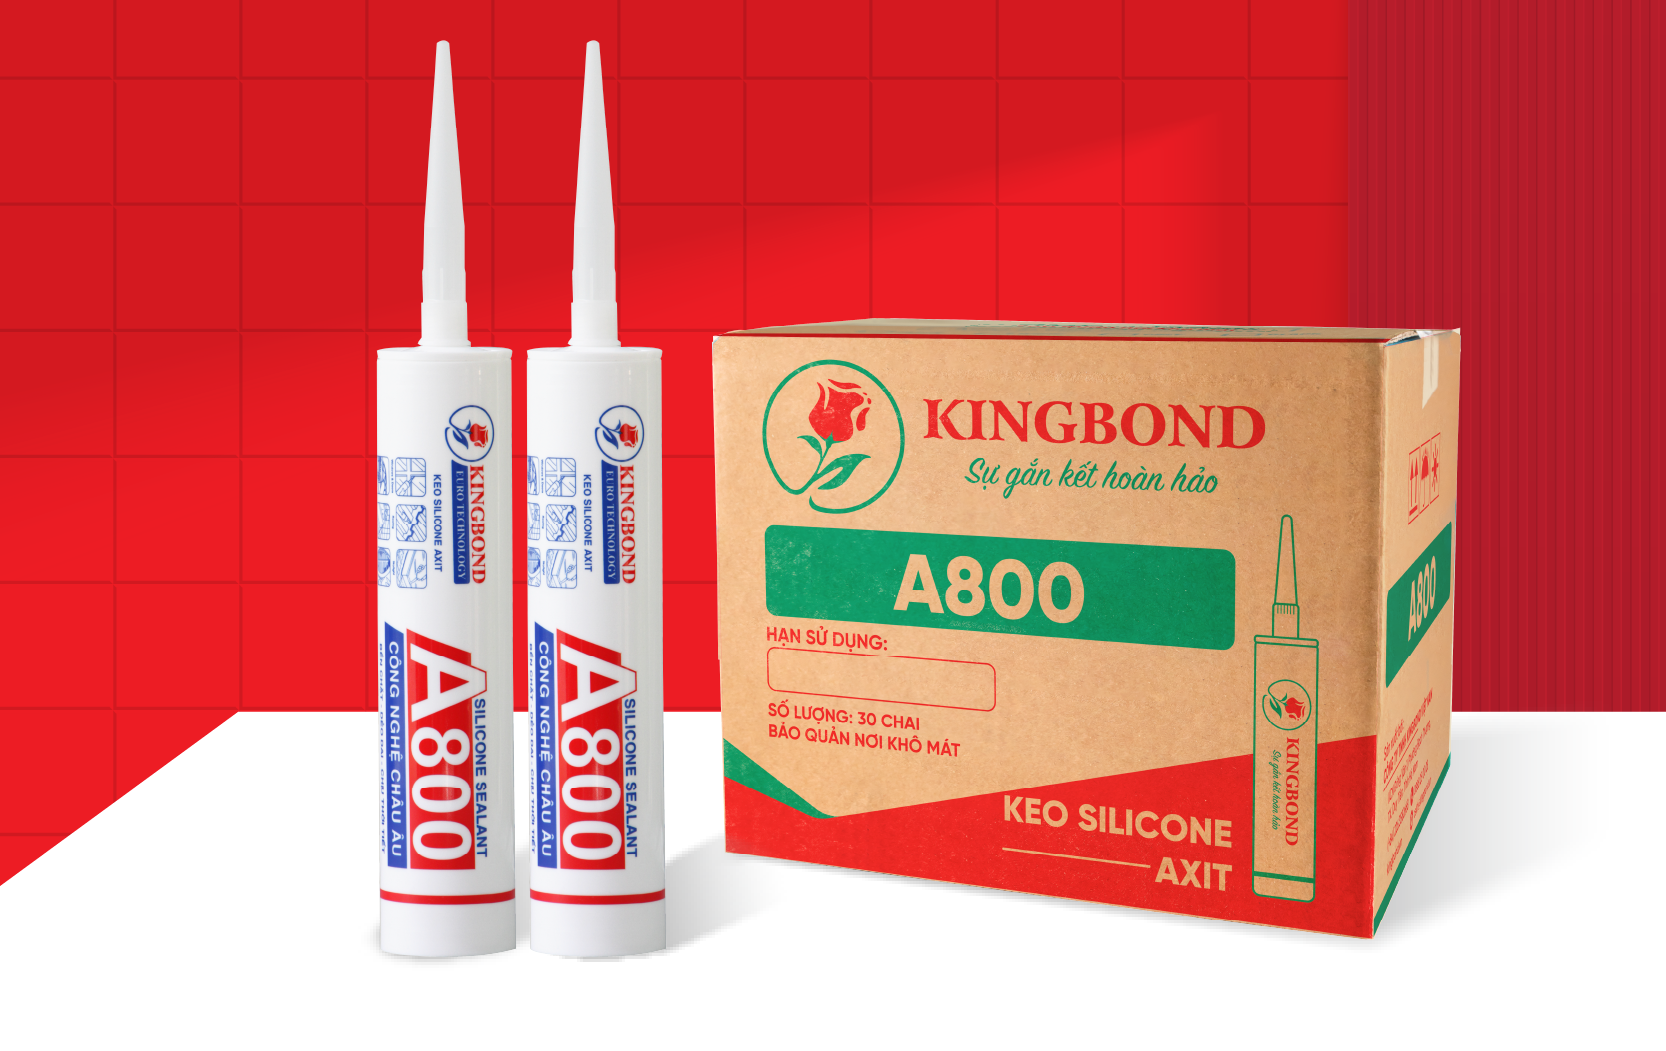 Keo silicone axit A800 - Công Ty TNHH Kingbond Việt Nam